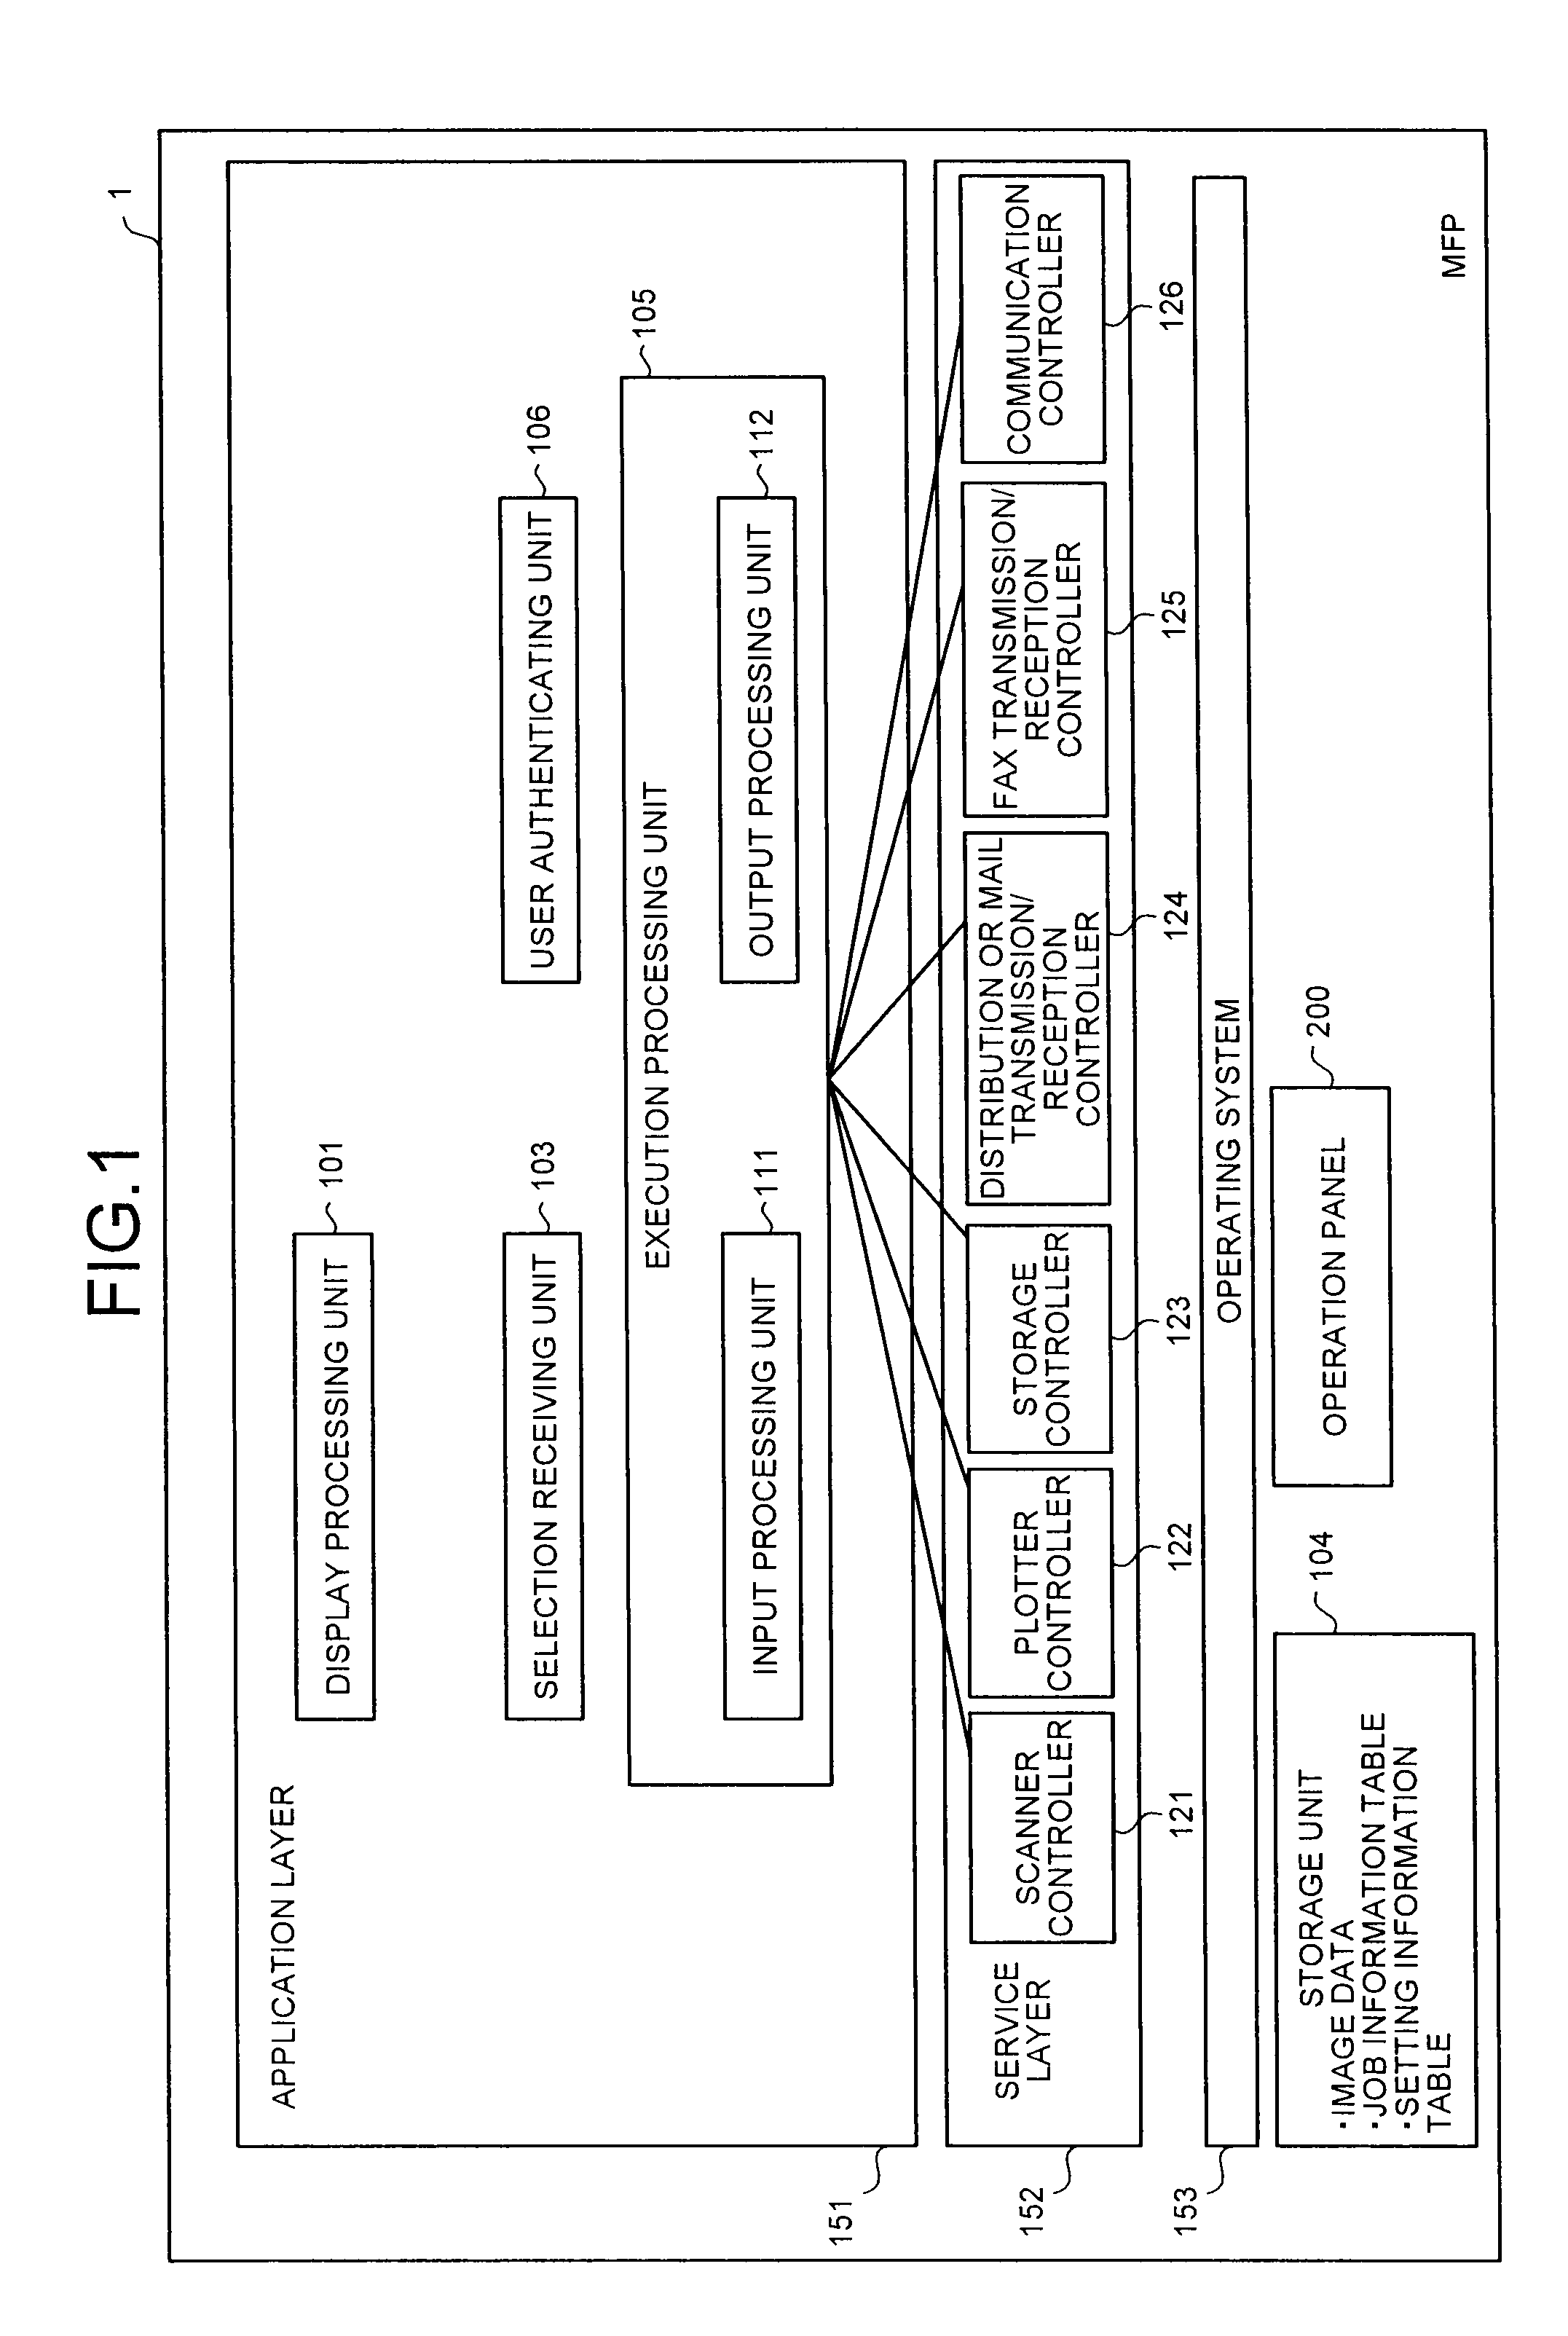 Image forming apparatus, display processing apparatus, display processing method, and computer program product